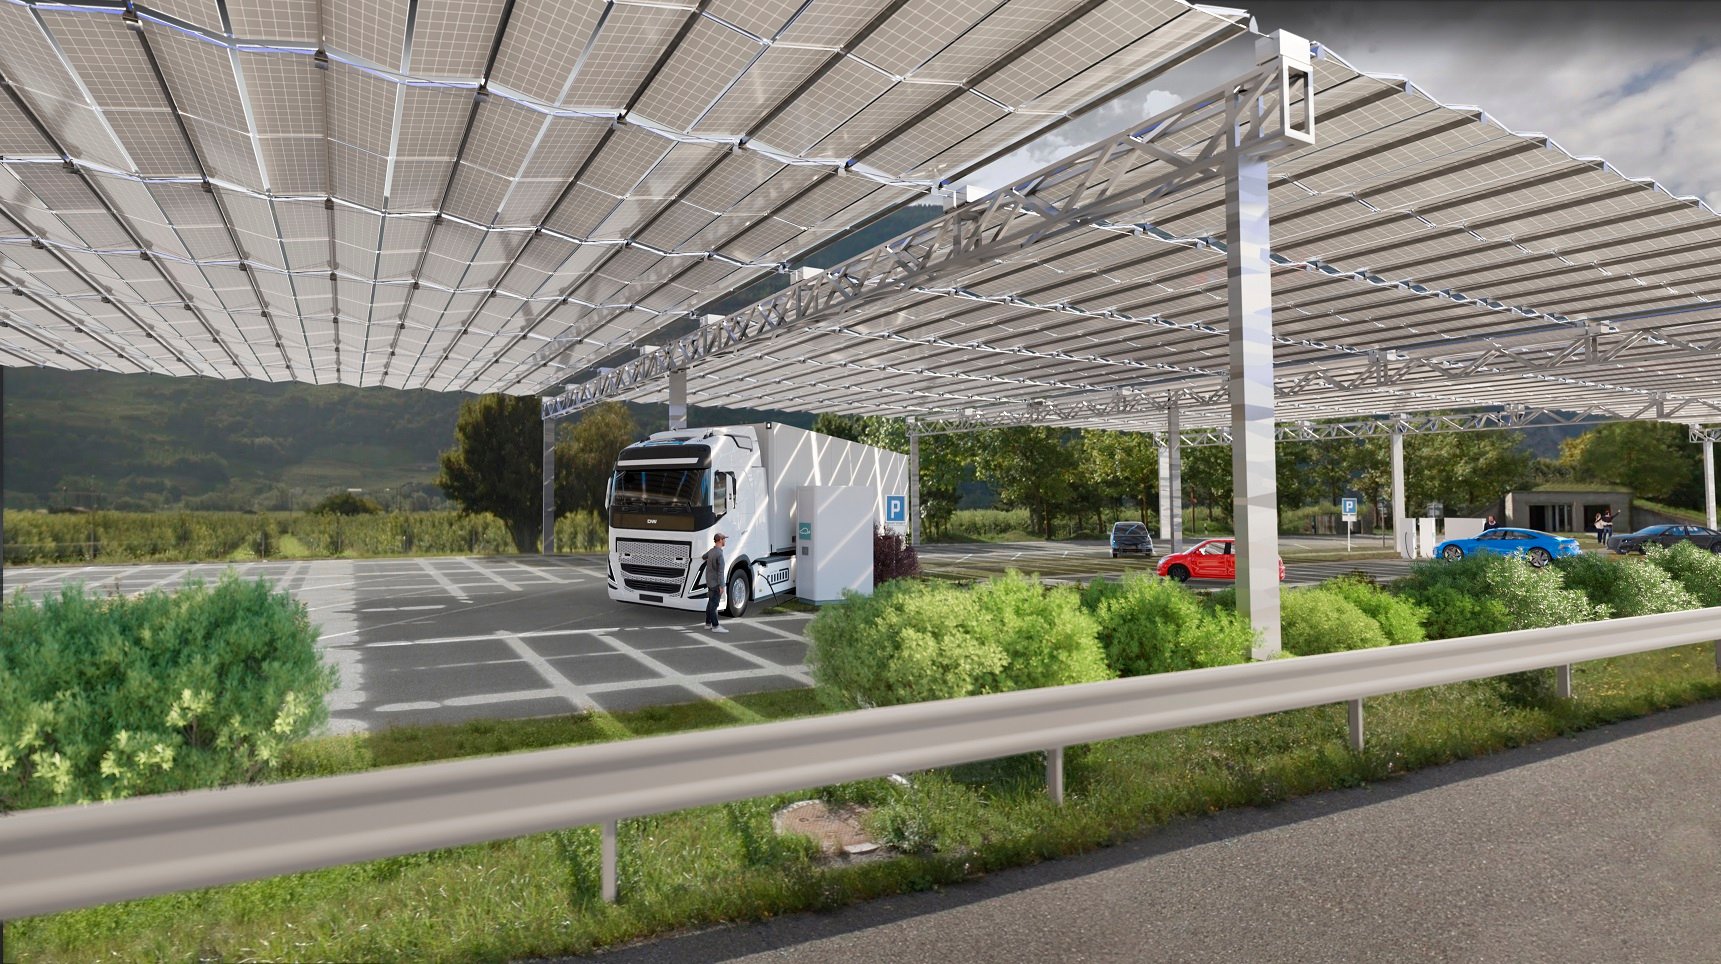 45 solar folding roofs for motorway rest areas